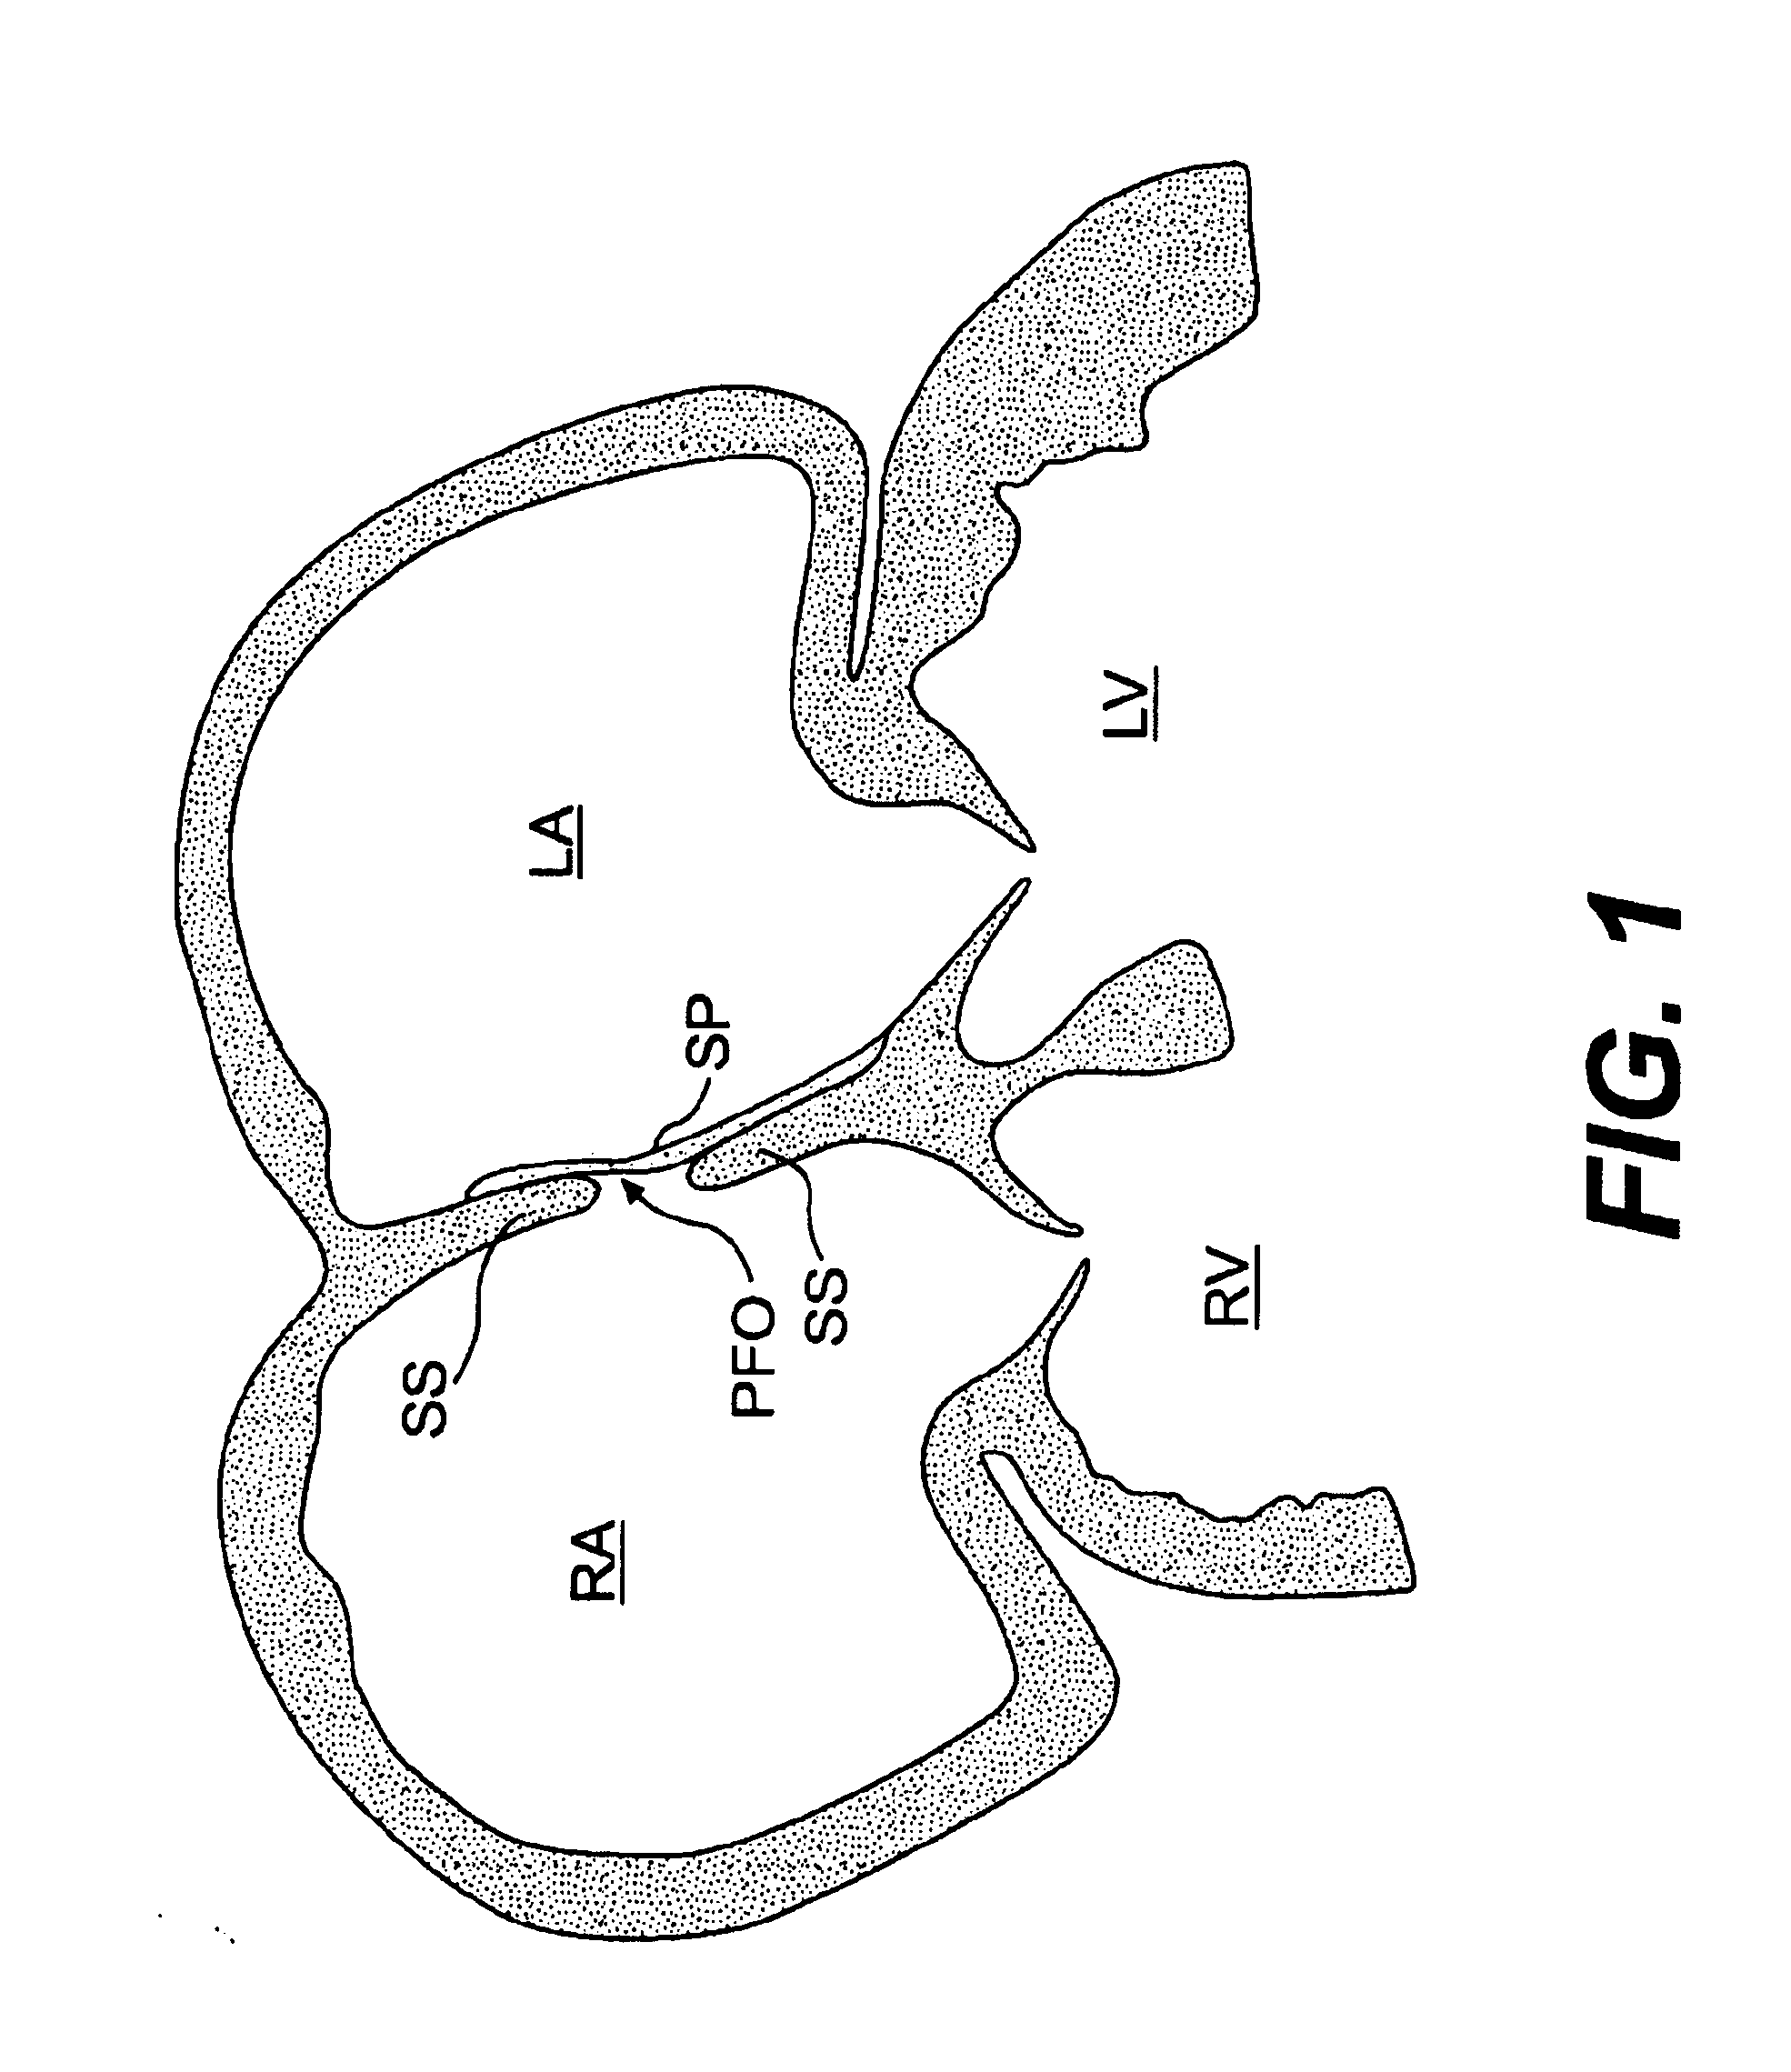 Closure devices, related delivery methods, and related methods of use